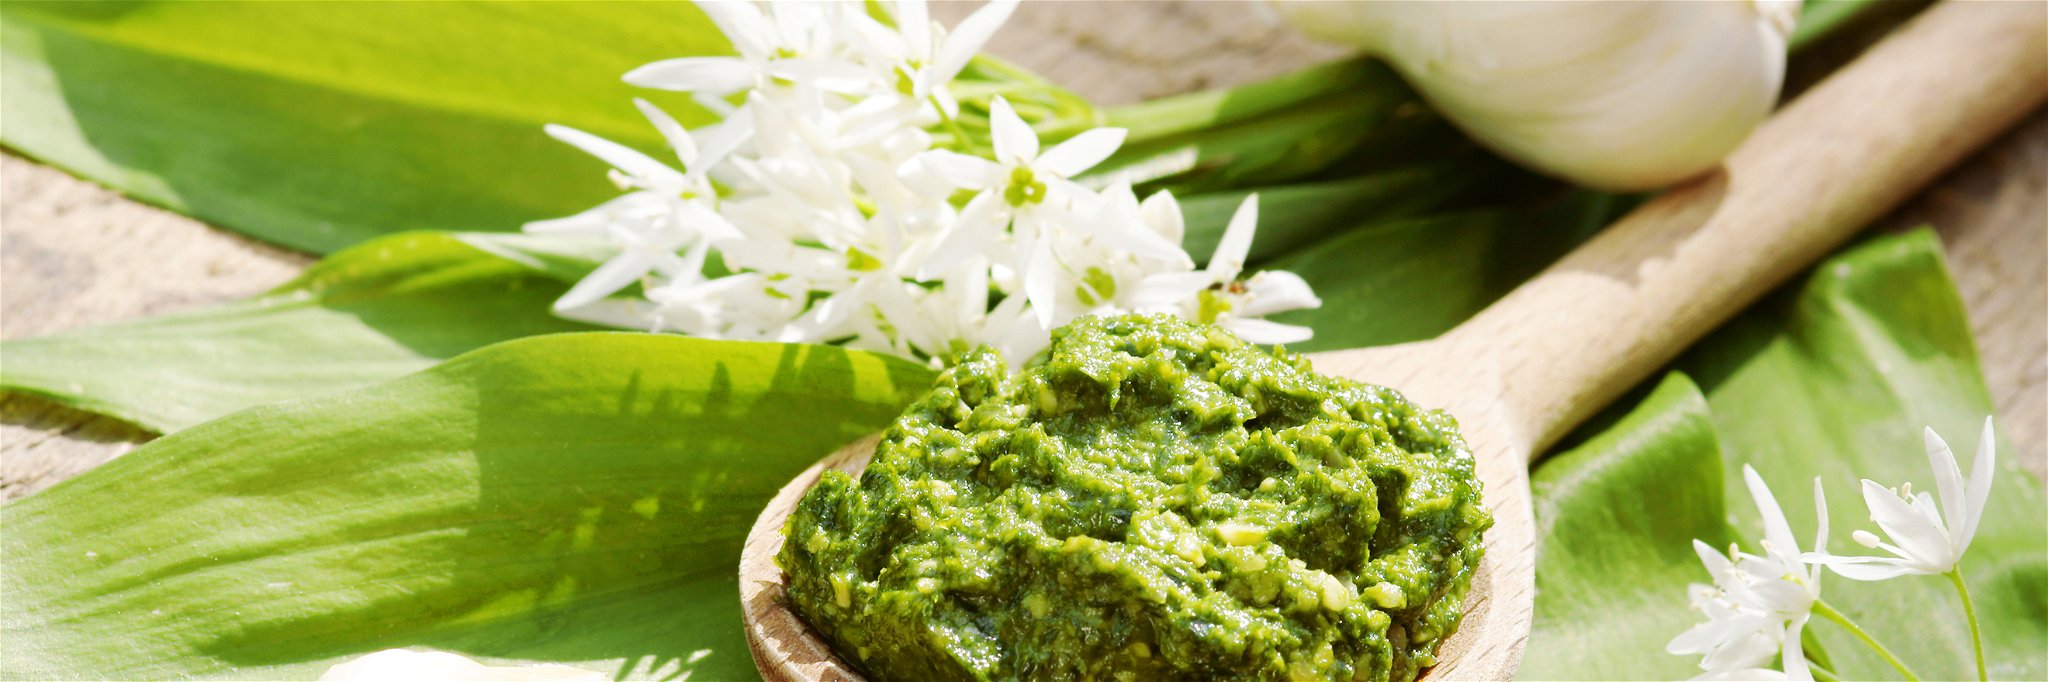 Wild garlic can be used in a myriad of dishes including&nbsp;pesto.